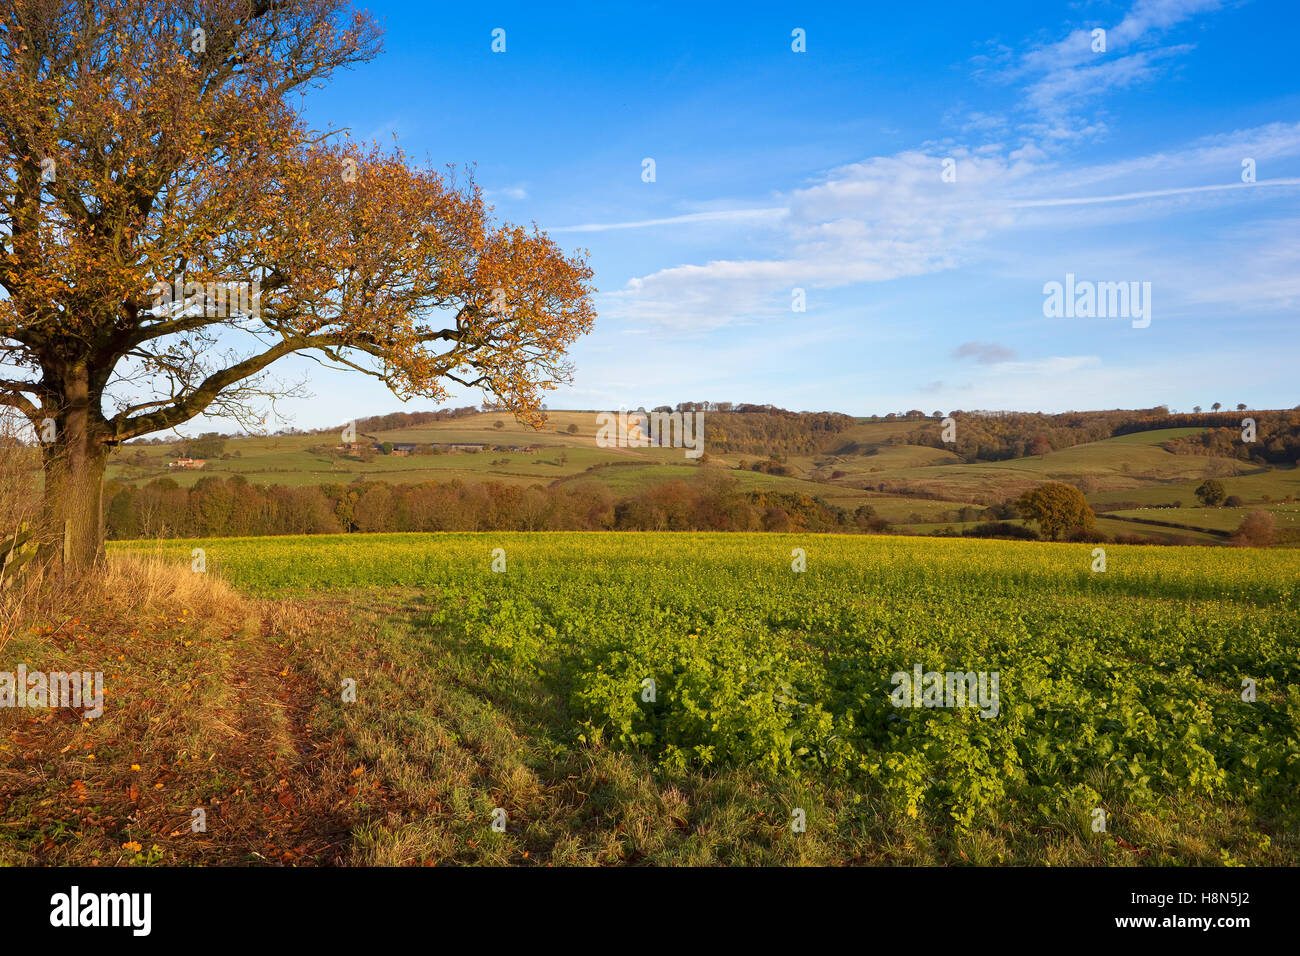 A colorful mature Oak tree by a yellow flowered mustard crop in the scenic Yorkshire wolds landscape in autumn. Stock Photo